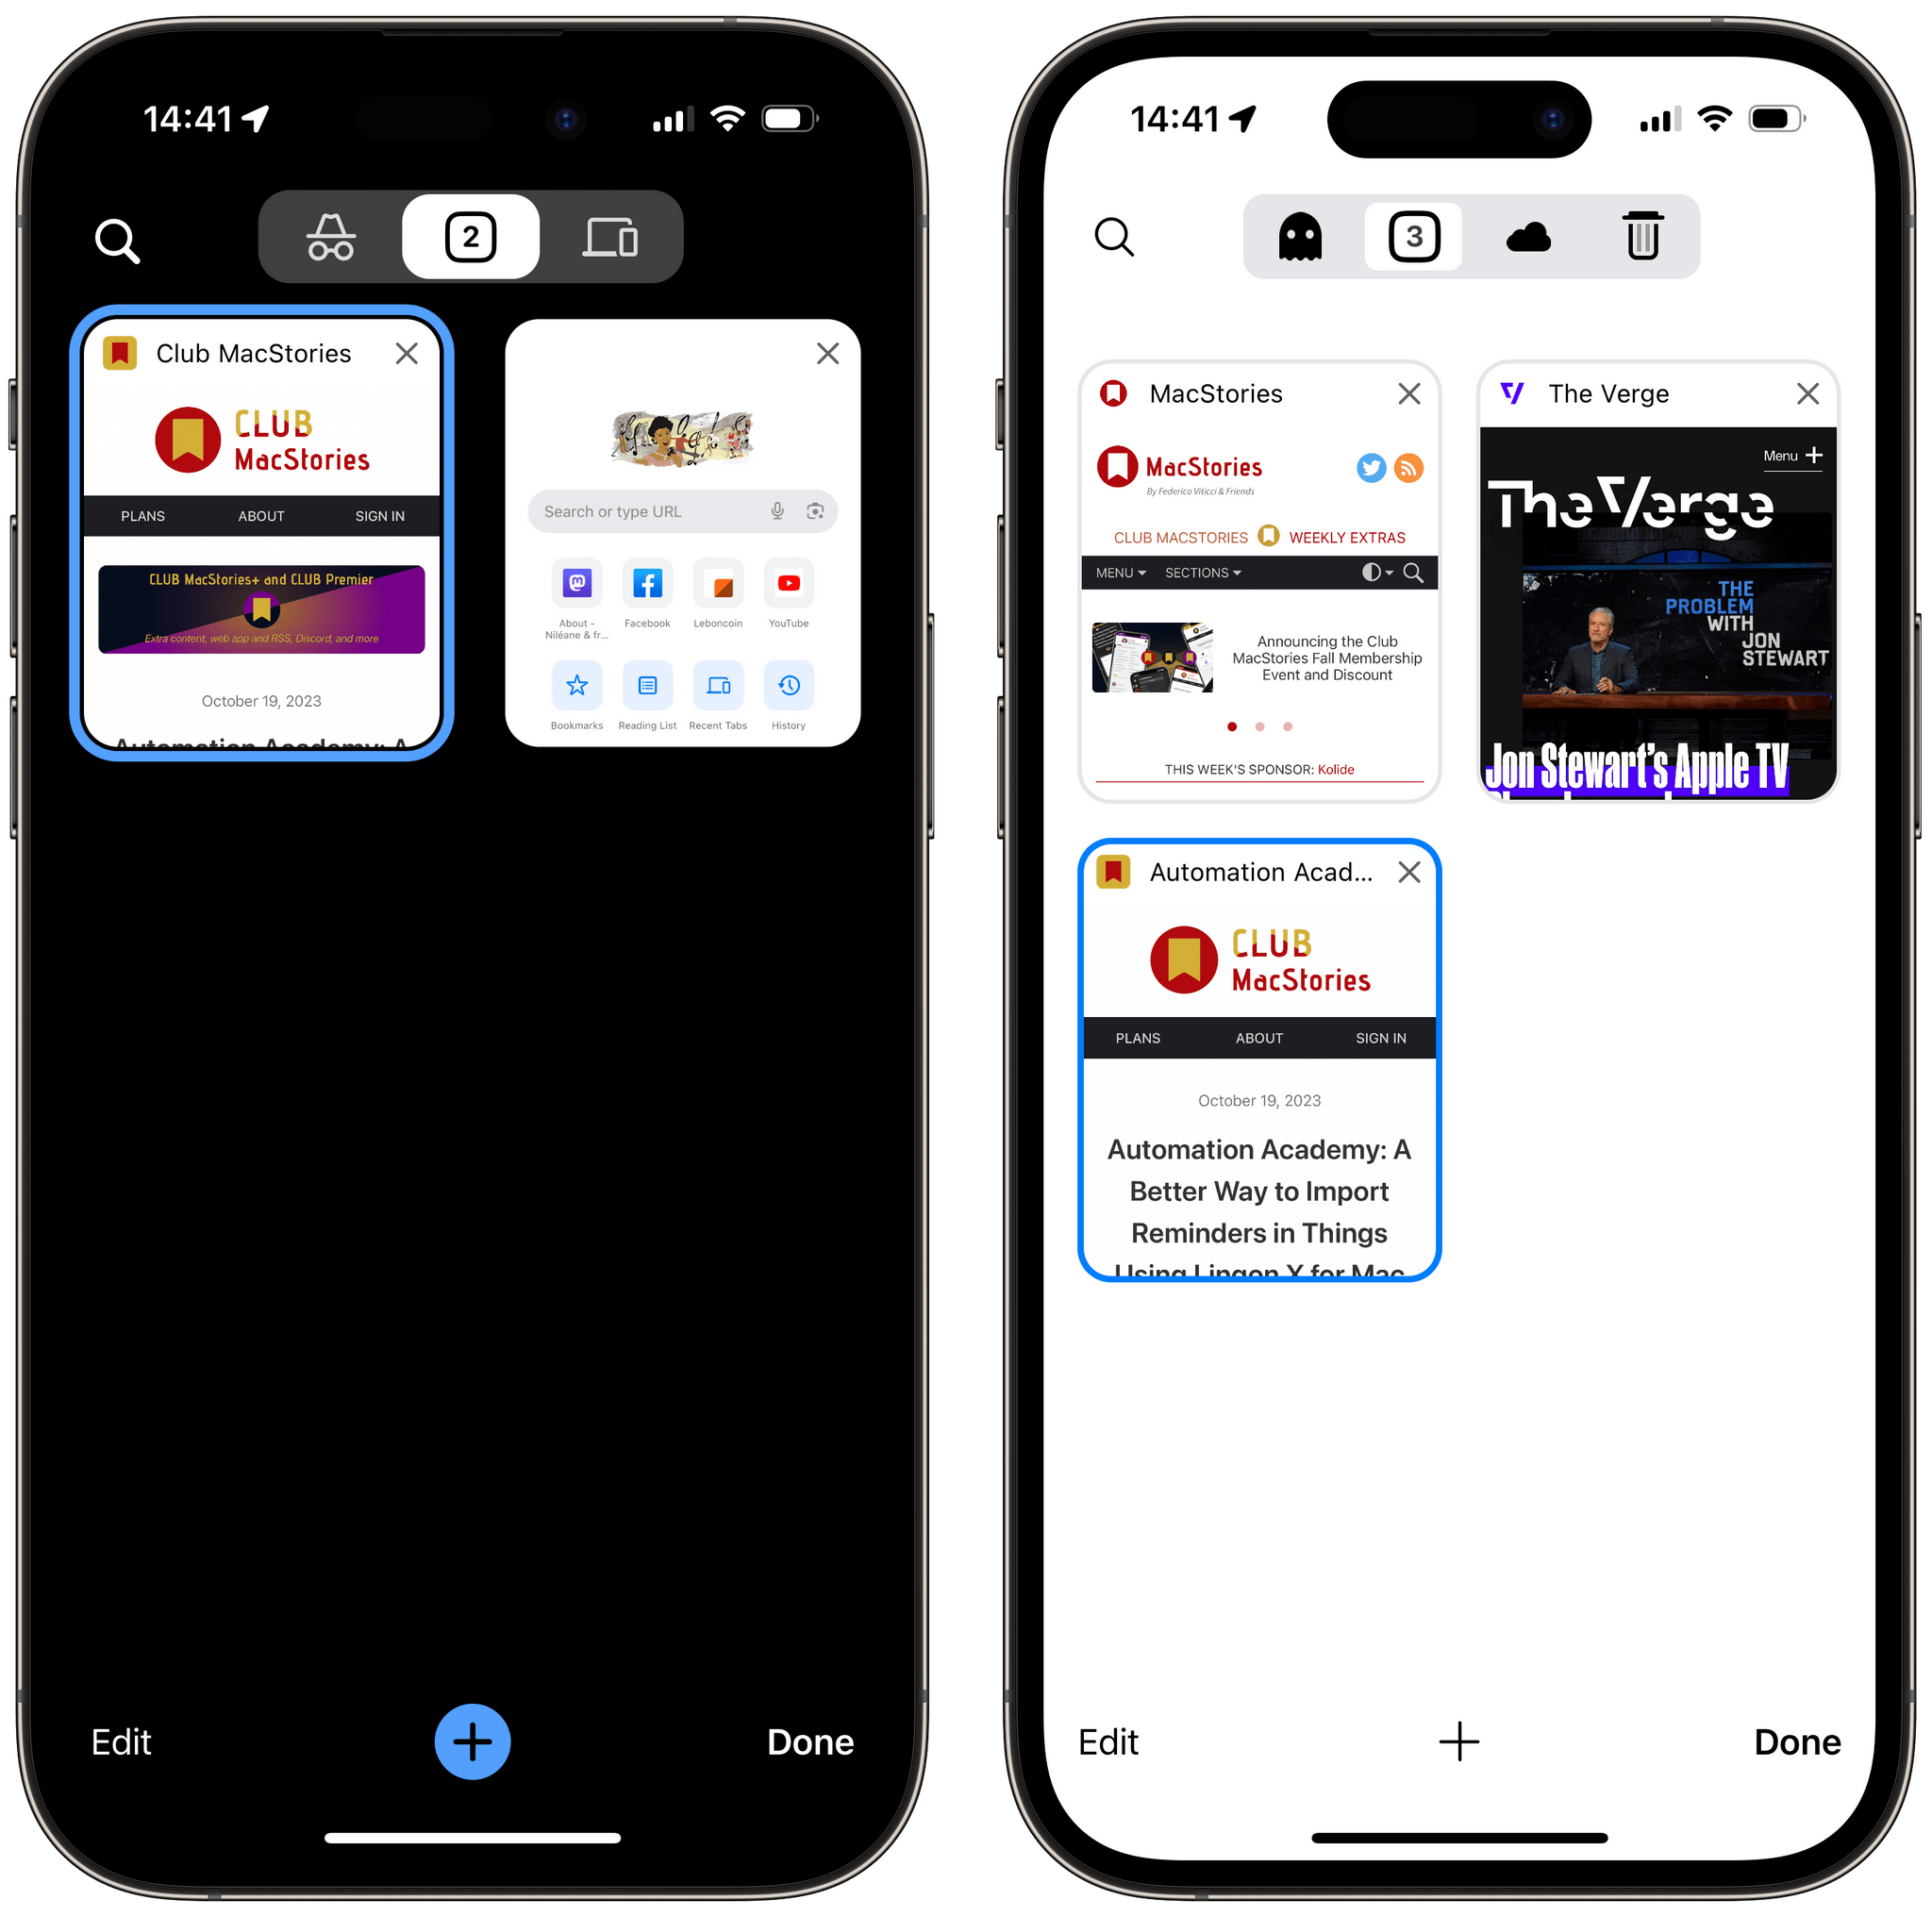 Vivaldi and Chrome share a lot of UI similarities on iOS. Left is Chrome's tab view. Right is Vivaldi's tab view.